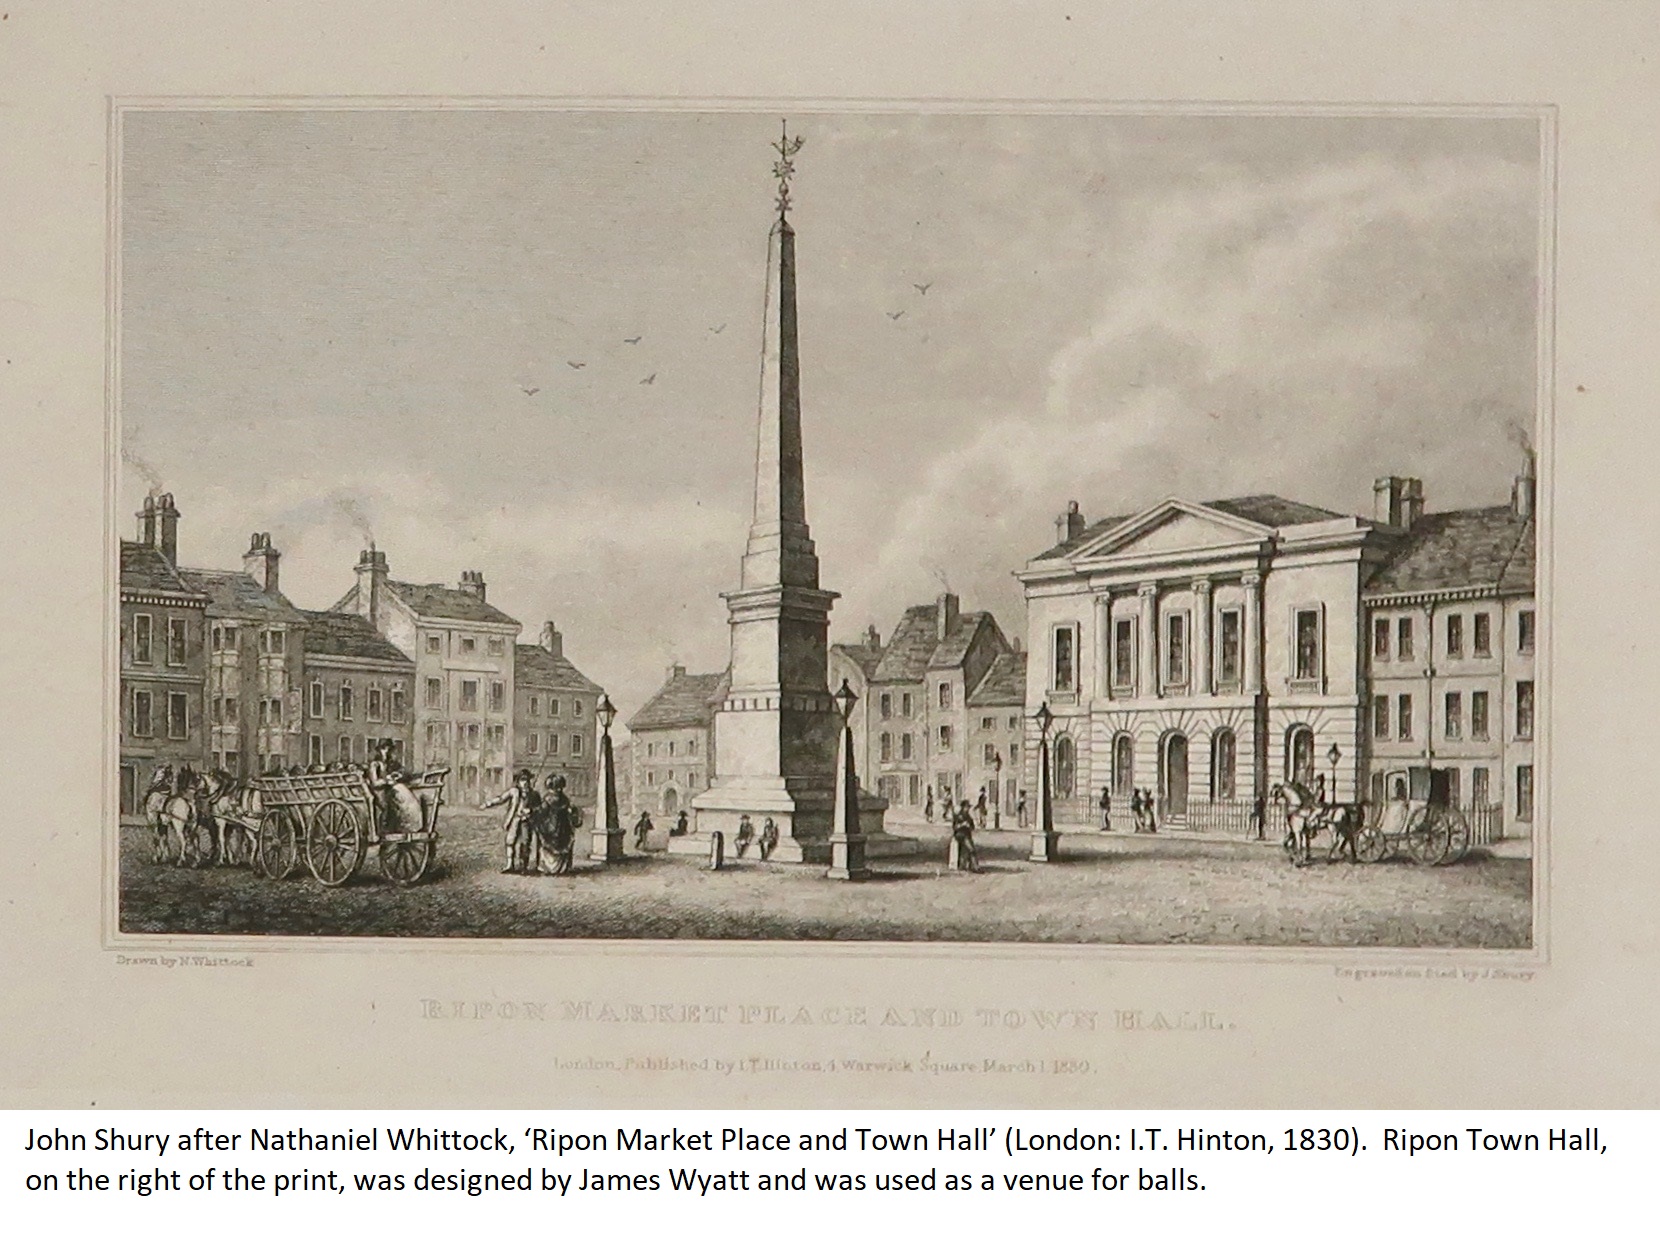 John Shury after Nathaniel Whittock, ‘Ripon Market Place and Town Hall’ (London: I.T. Hinton, 1830).  Ripon Town Hall, on the right of the print, was designed by James Wyatt and was used as a venue for balls.